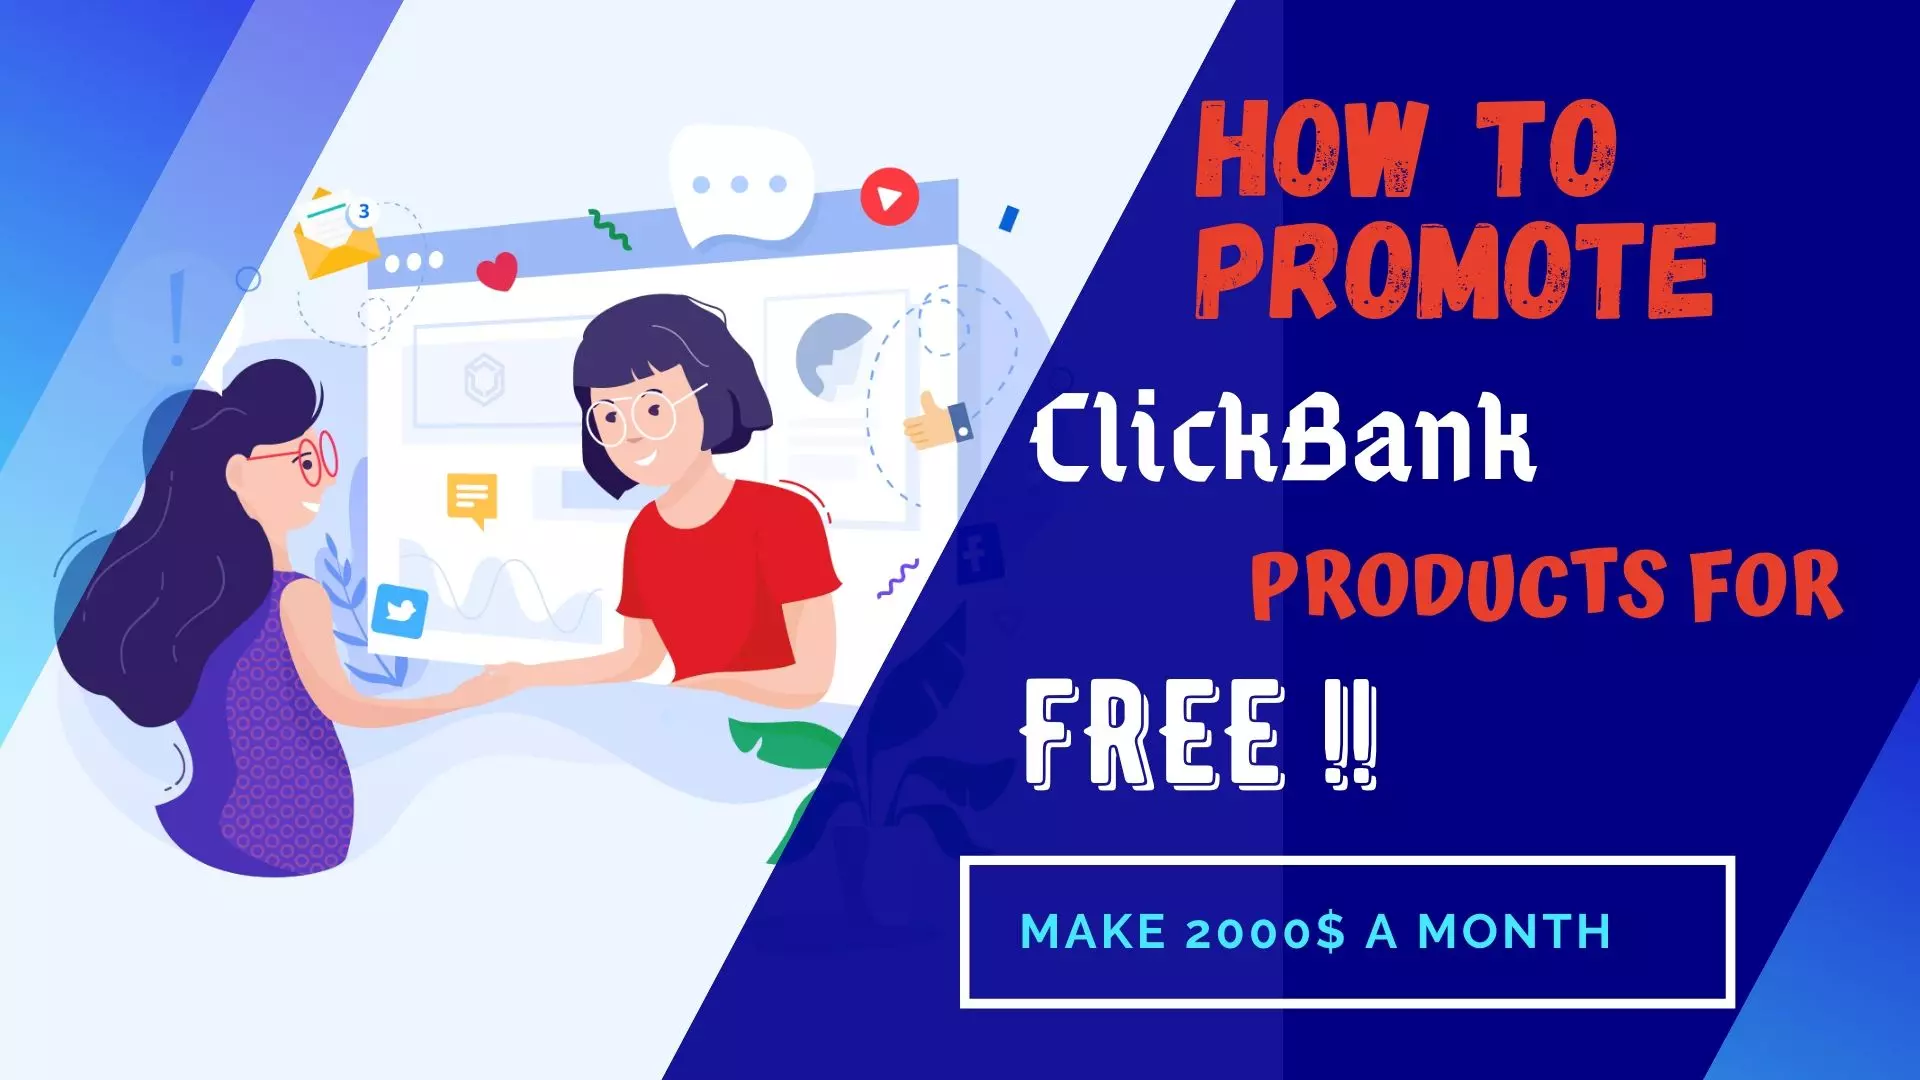 How to promote ClickBank products for free [make 2000$ a month] without a website